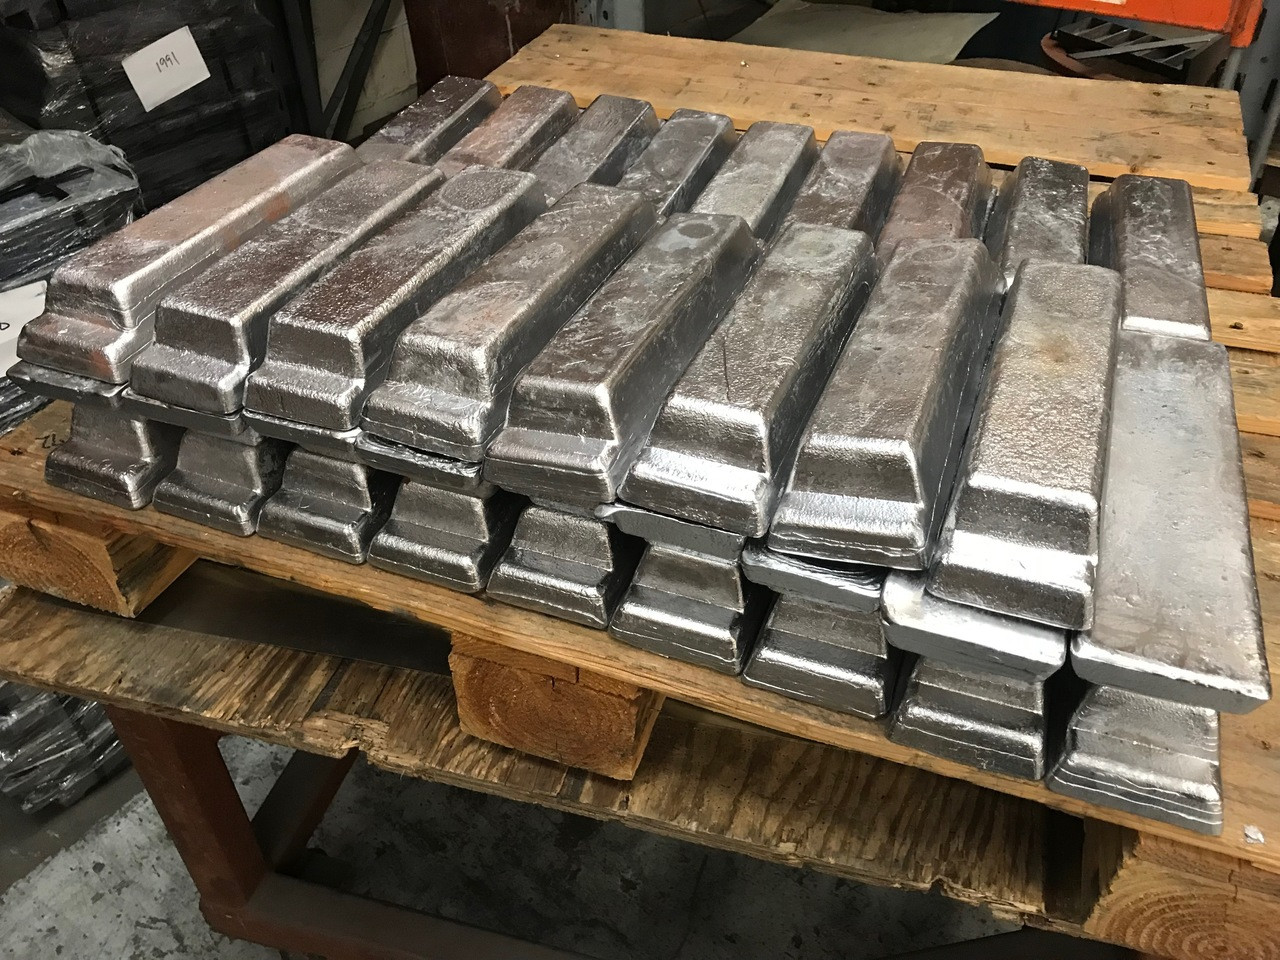 Pallet Hardball Bullet Alloy Ingots 1000 pounds 2%-Tin,6%-Antimony,and  92%-Lead - RotoMetals